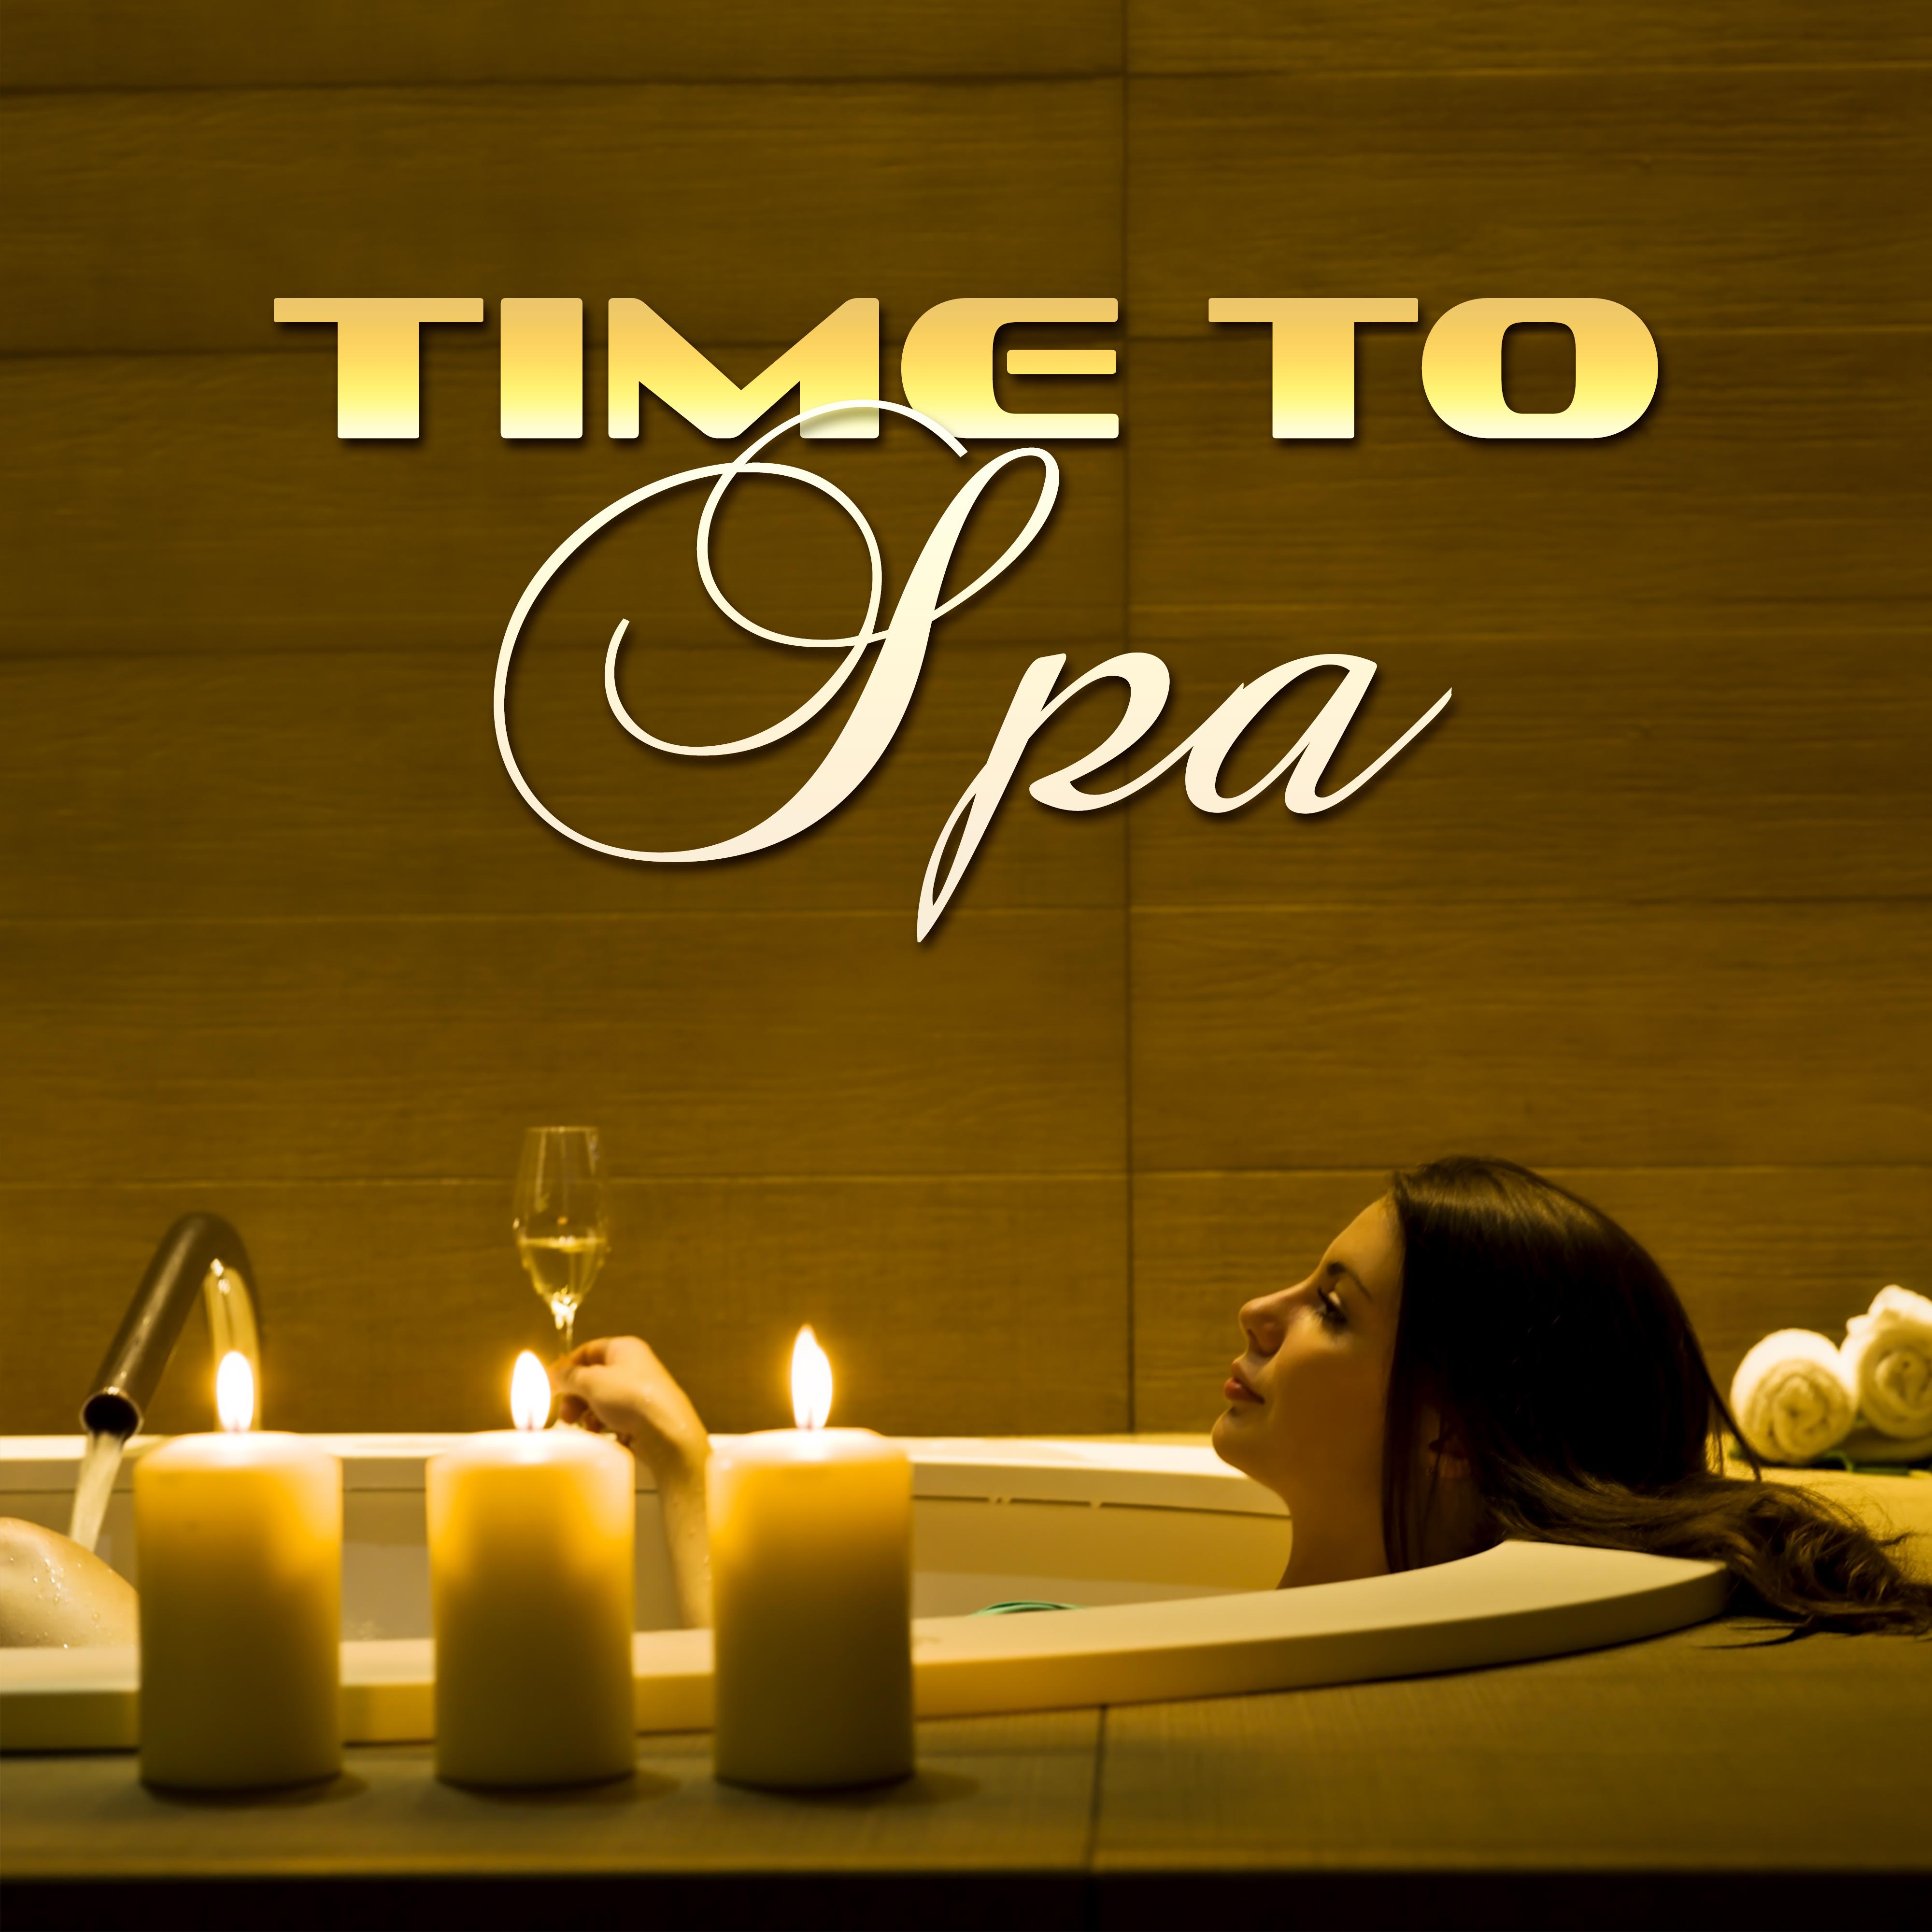 Time to Spa – Relaxation Sounds for Spa, Wellness, Ocean Waves, Sounds of the Birds, Deep Sleep